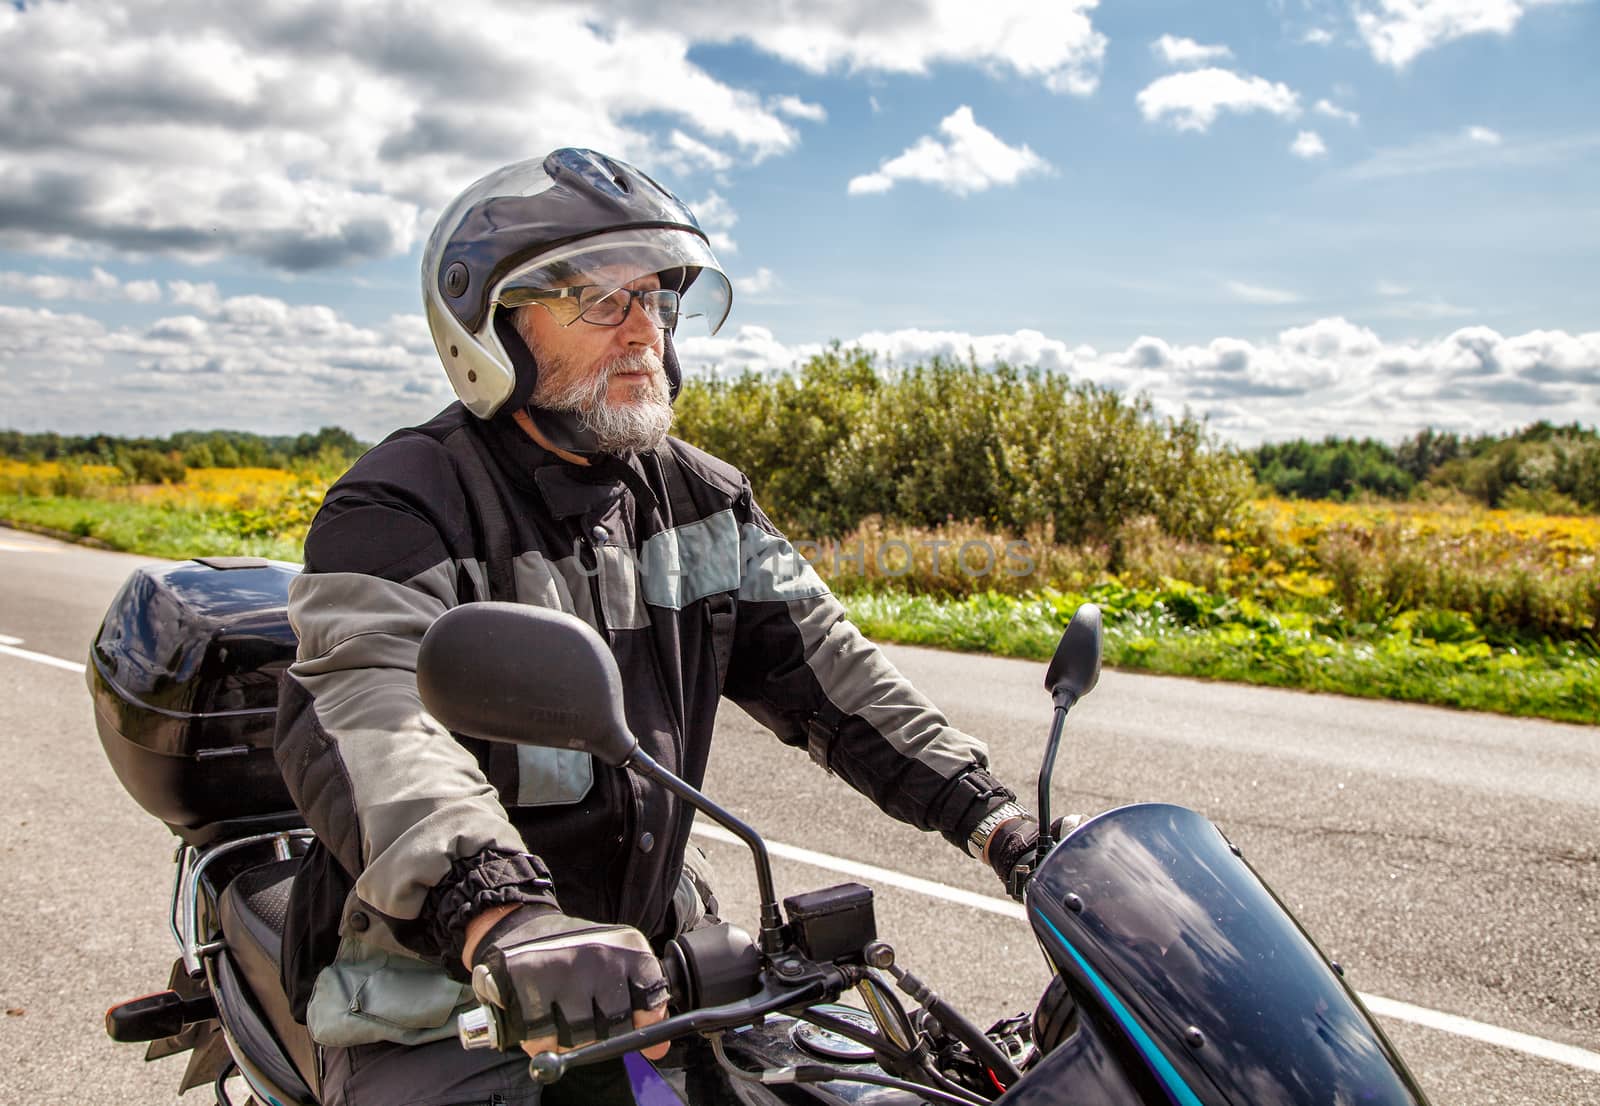 elderly motorcyclist wearing a jacket and glasses with a helmet sitting on his motorcycle on the road